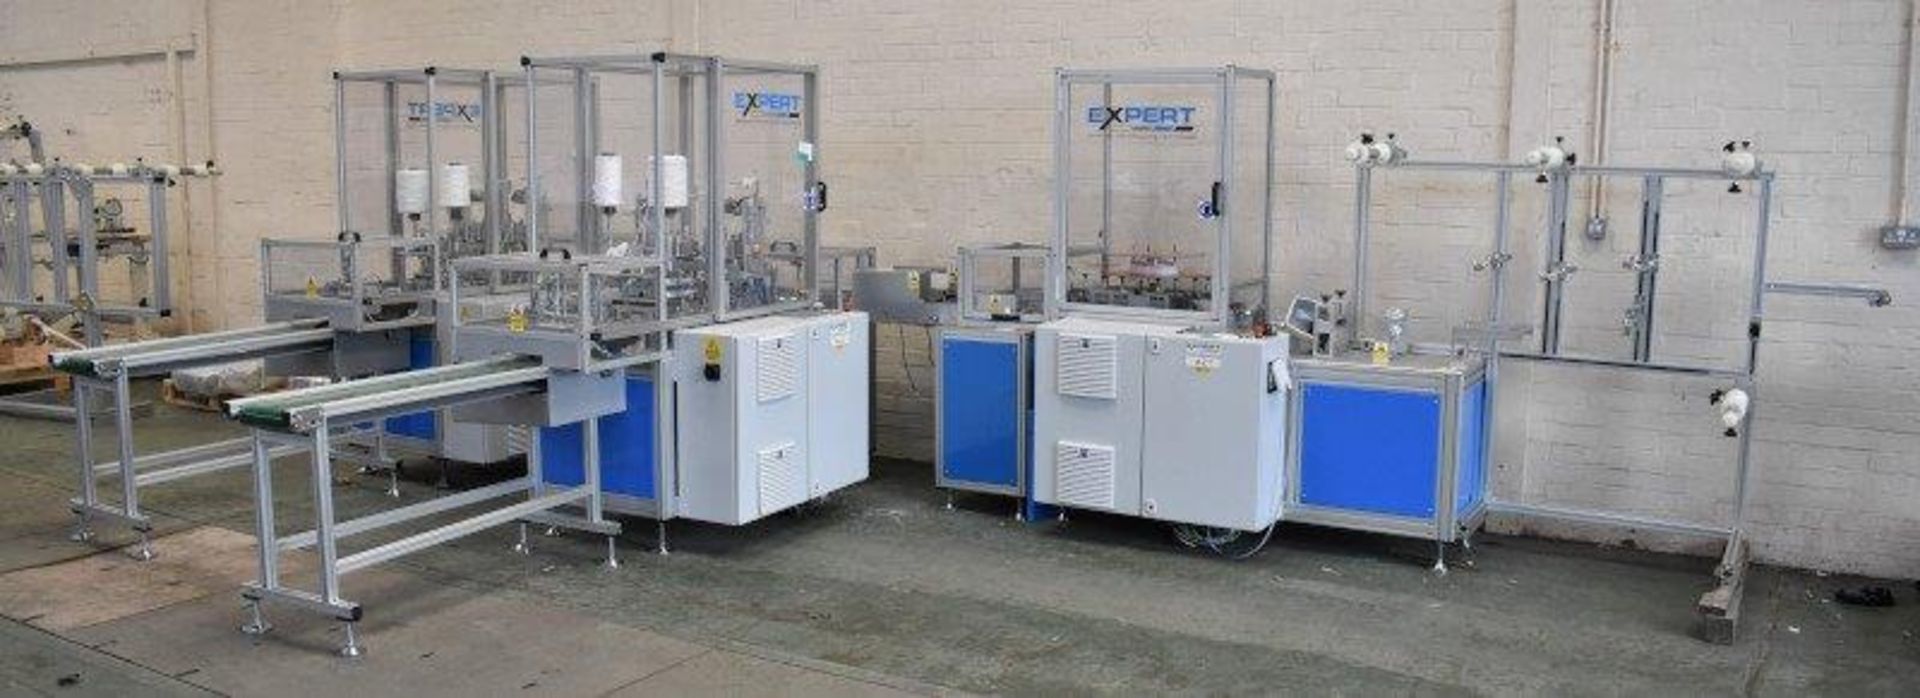 Expert fully automated Mask Making Machine including an Ilapak Smart flow wrapping packaging machine - Image 2 of 28